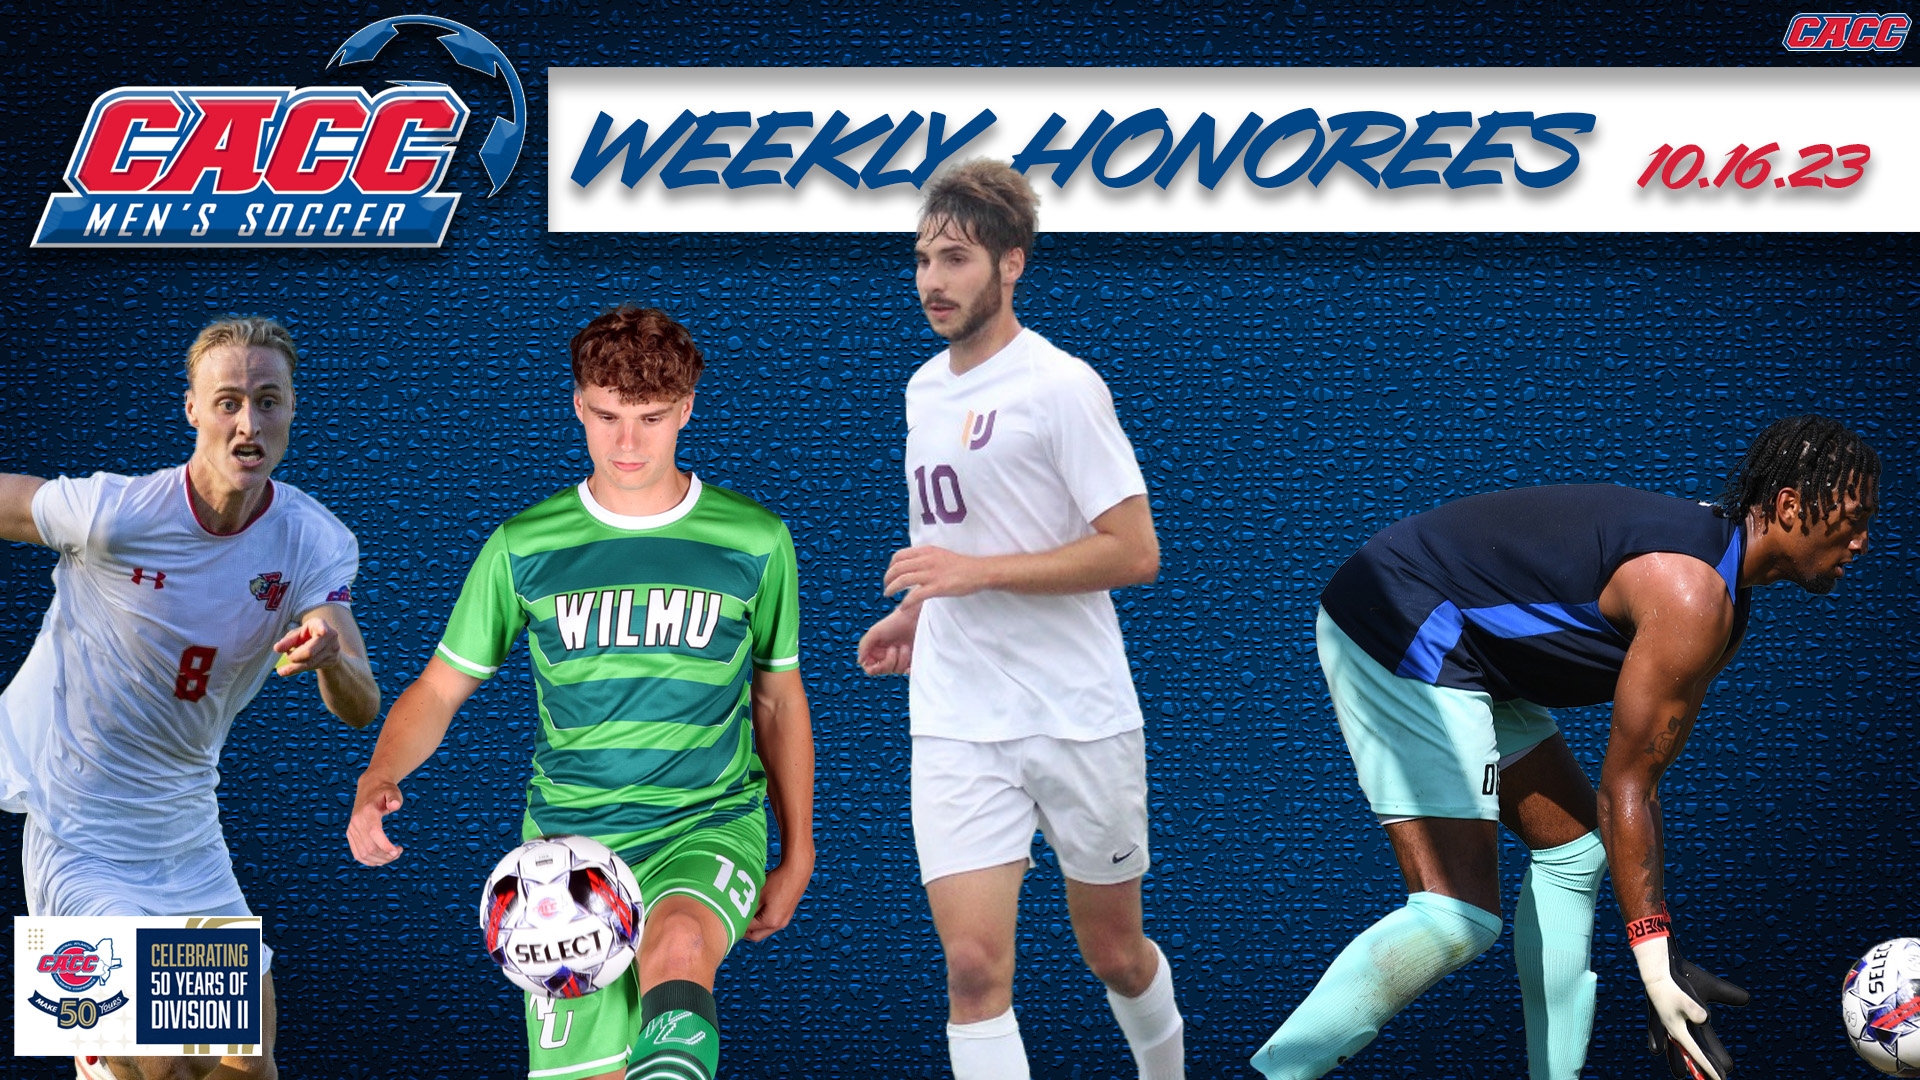 CACC Men's Soccer Weekly Honorees (10-16-23)